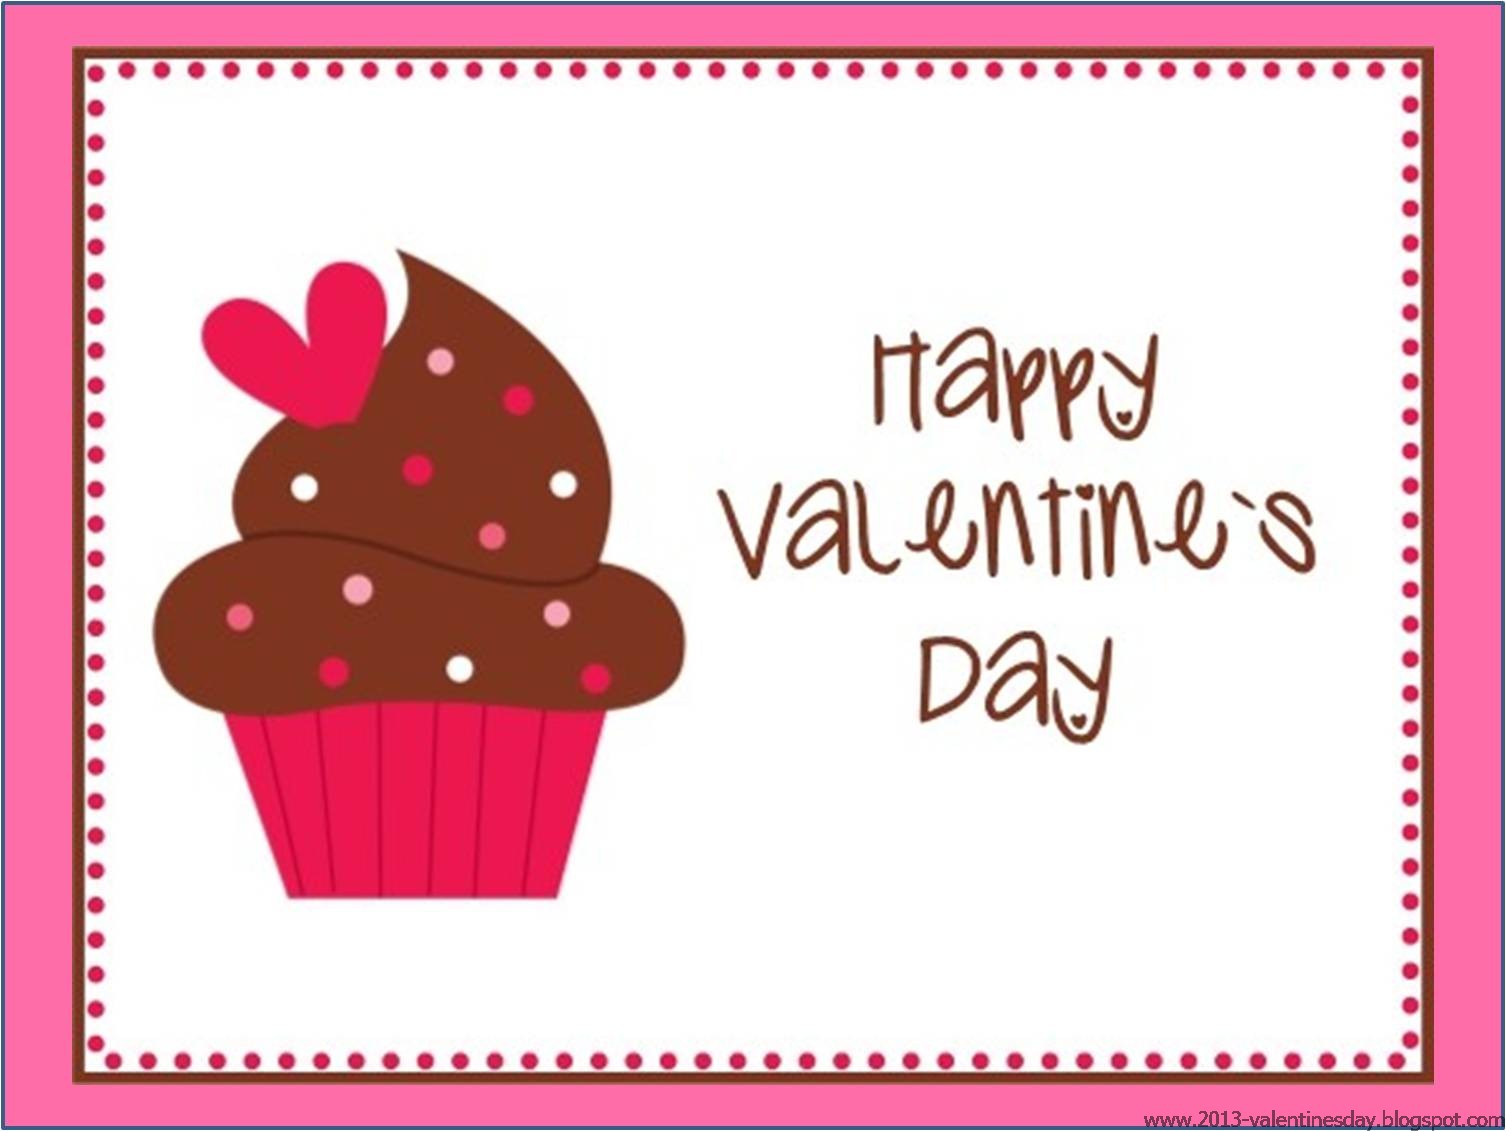 Valentines day Clip Art Collection 2013 | Online Quotes Gallery